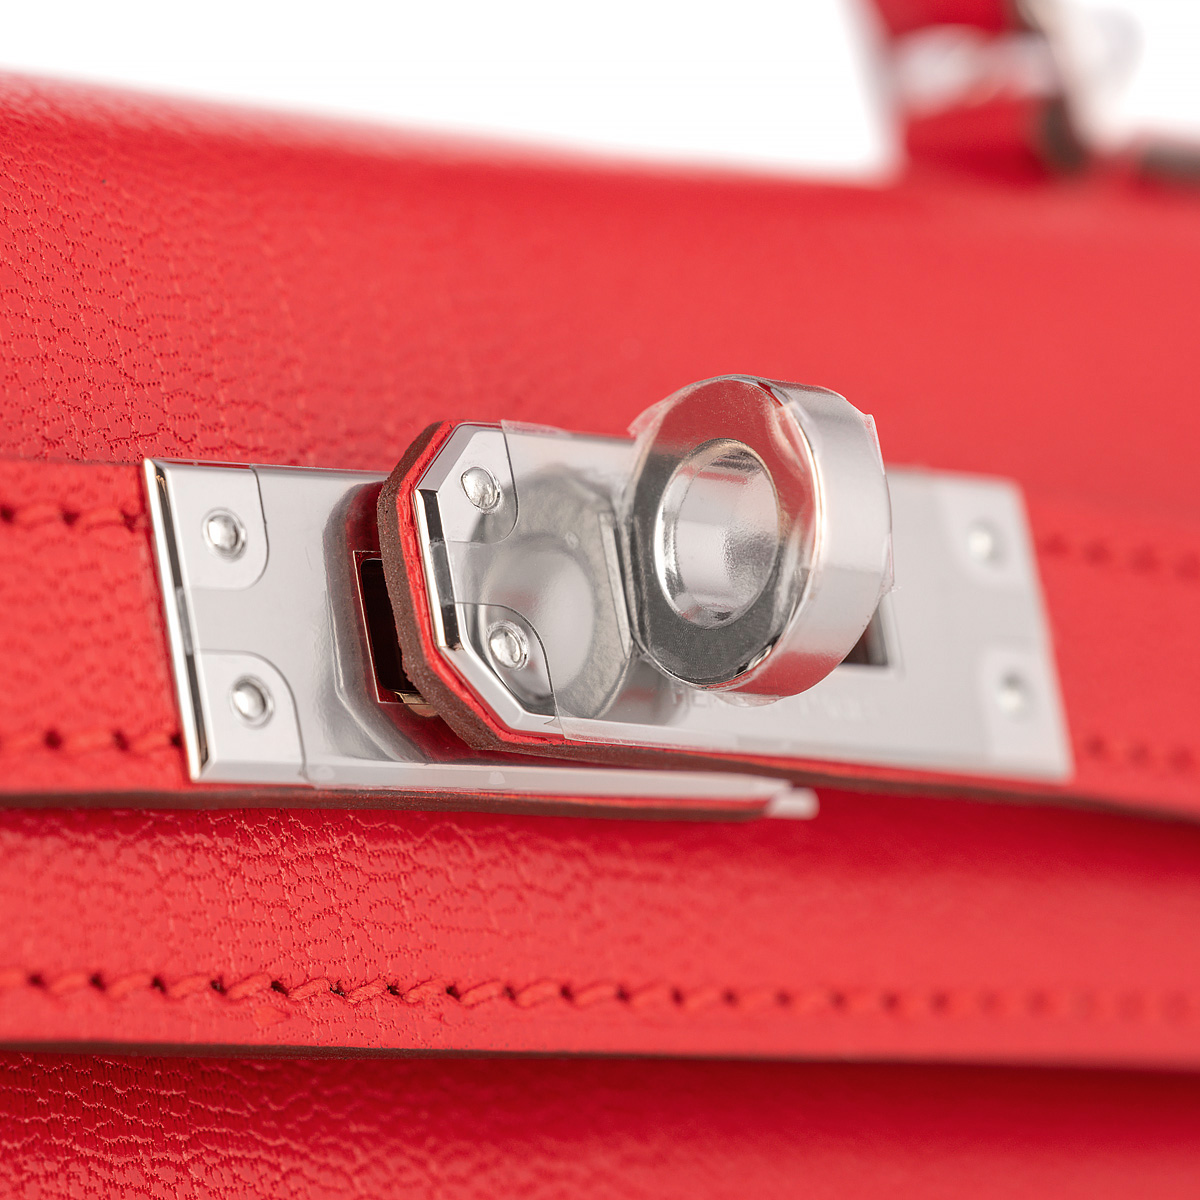 A ROUGE DE COEUR CHÈVRE LEATHER MINI KELLY II WITH GOLD HARDWARE